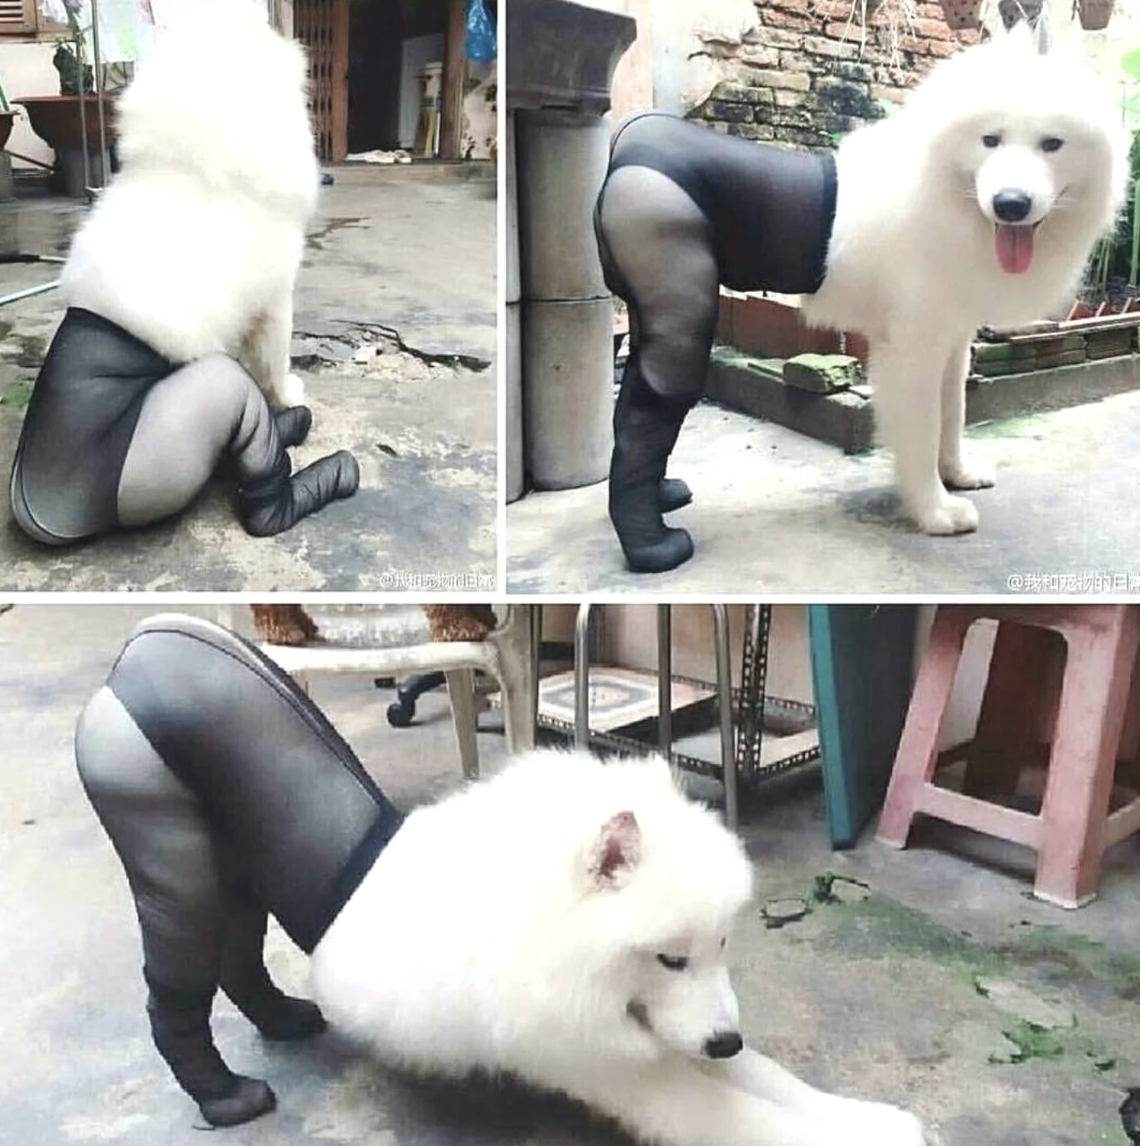 A dog with an edited image to appear as if it has human legs in tights and high heels in different poses